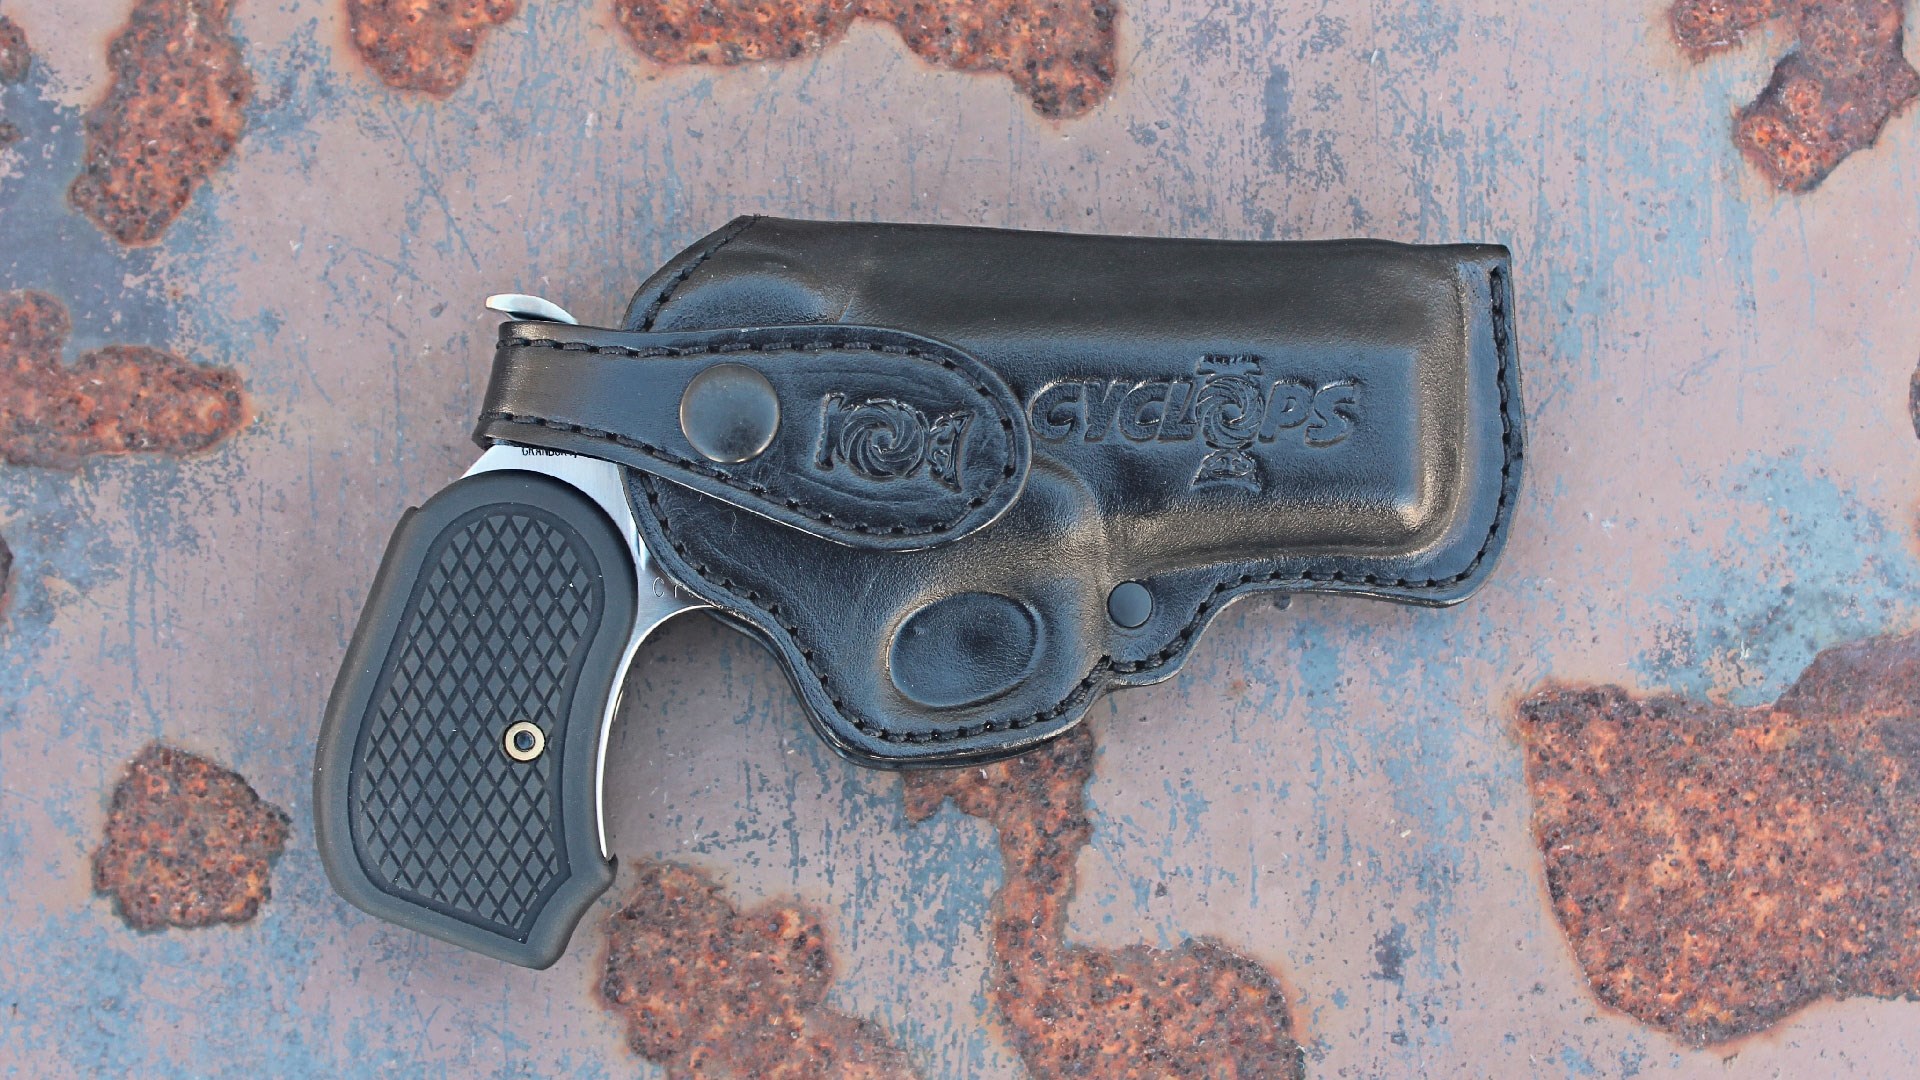 Bond Arms Cyclops Thumper in holster